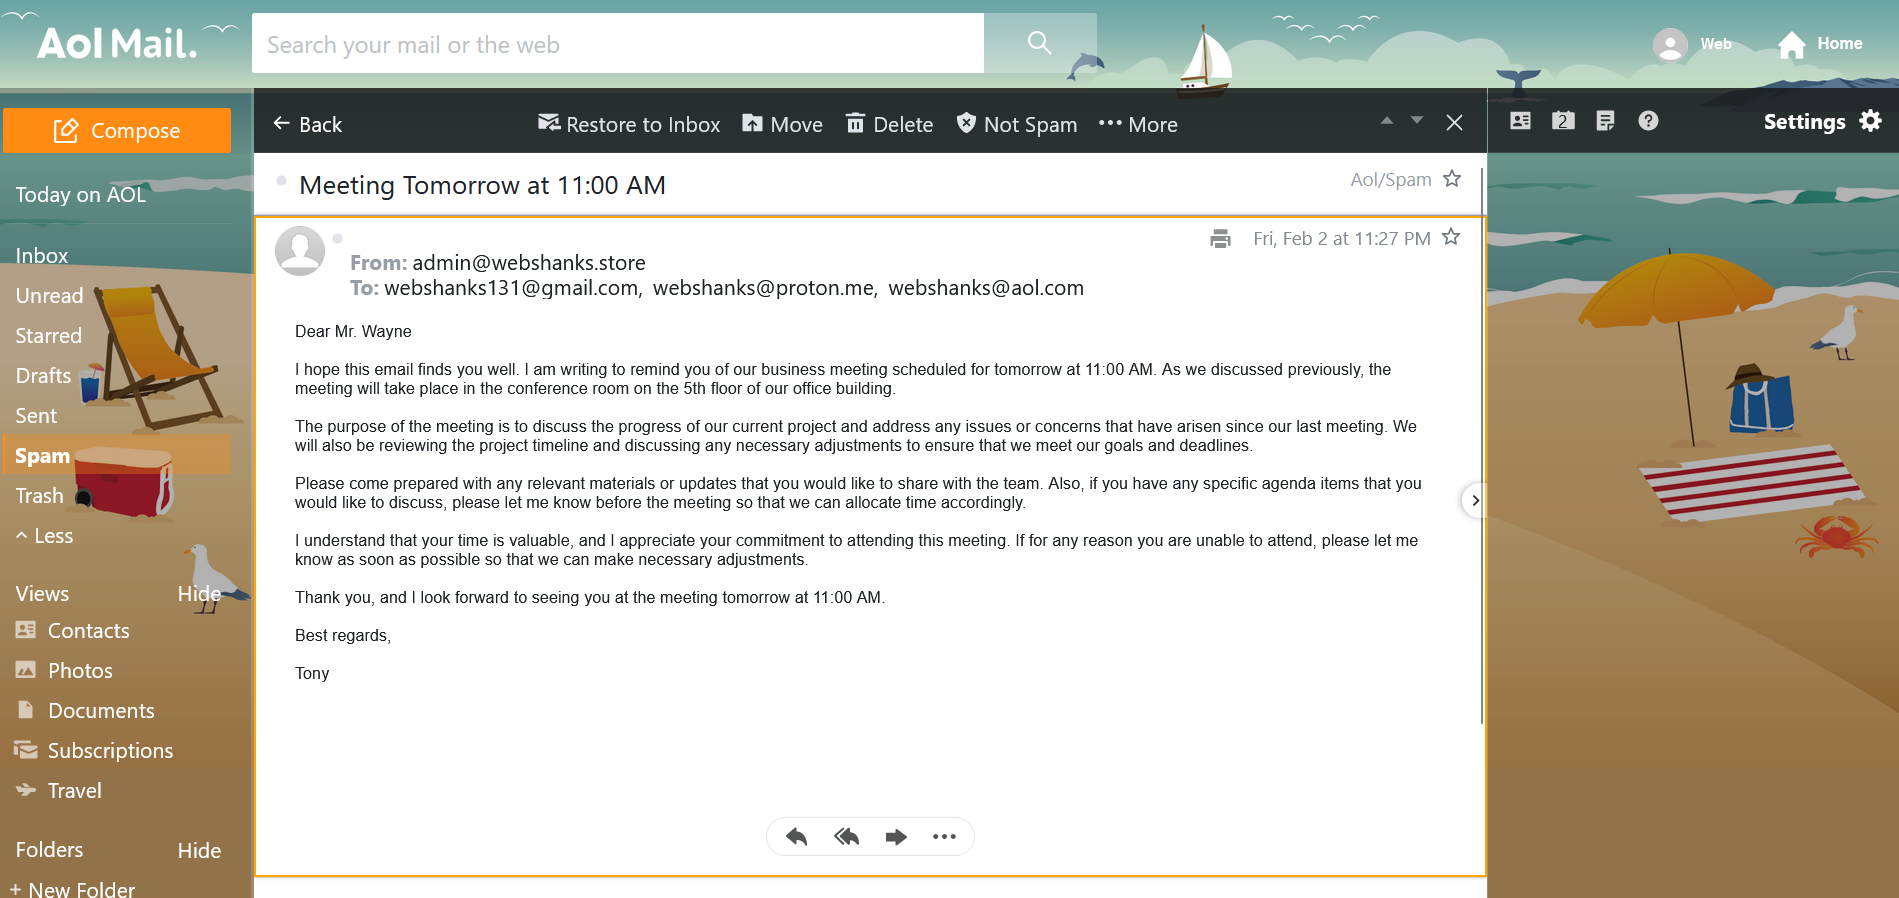 CyberPanel Email Sent to AOL Mail